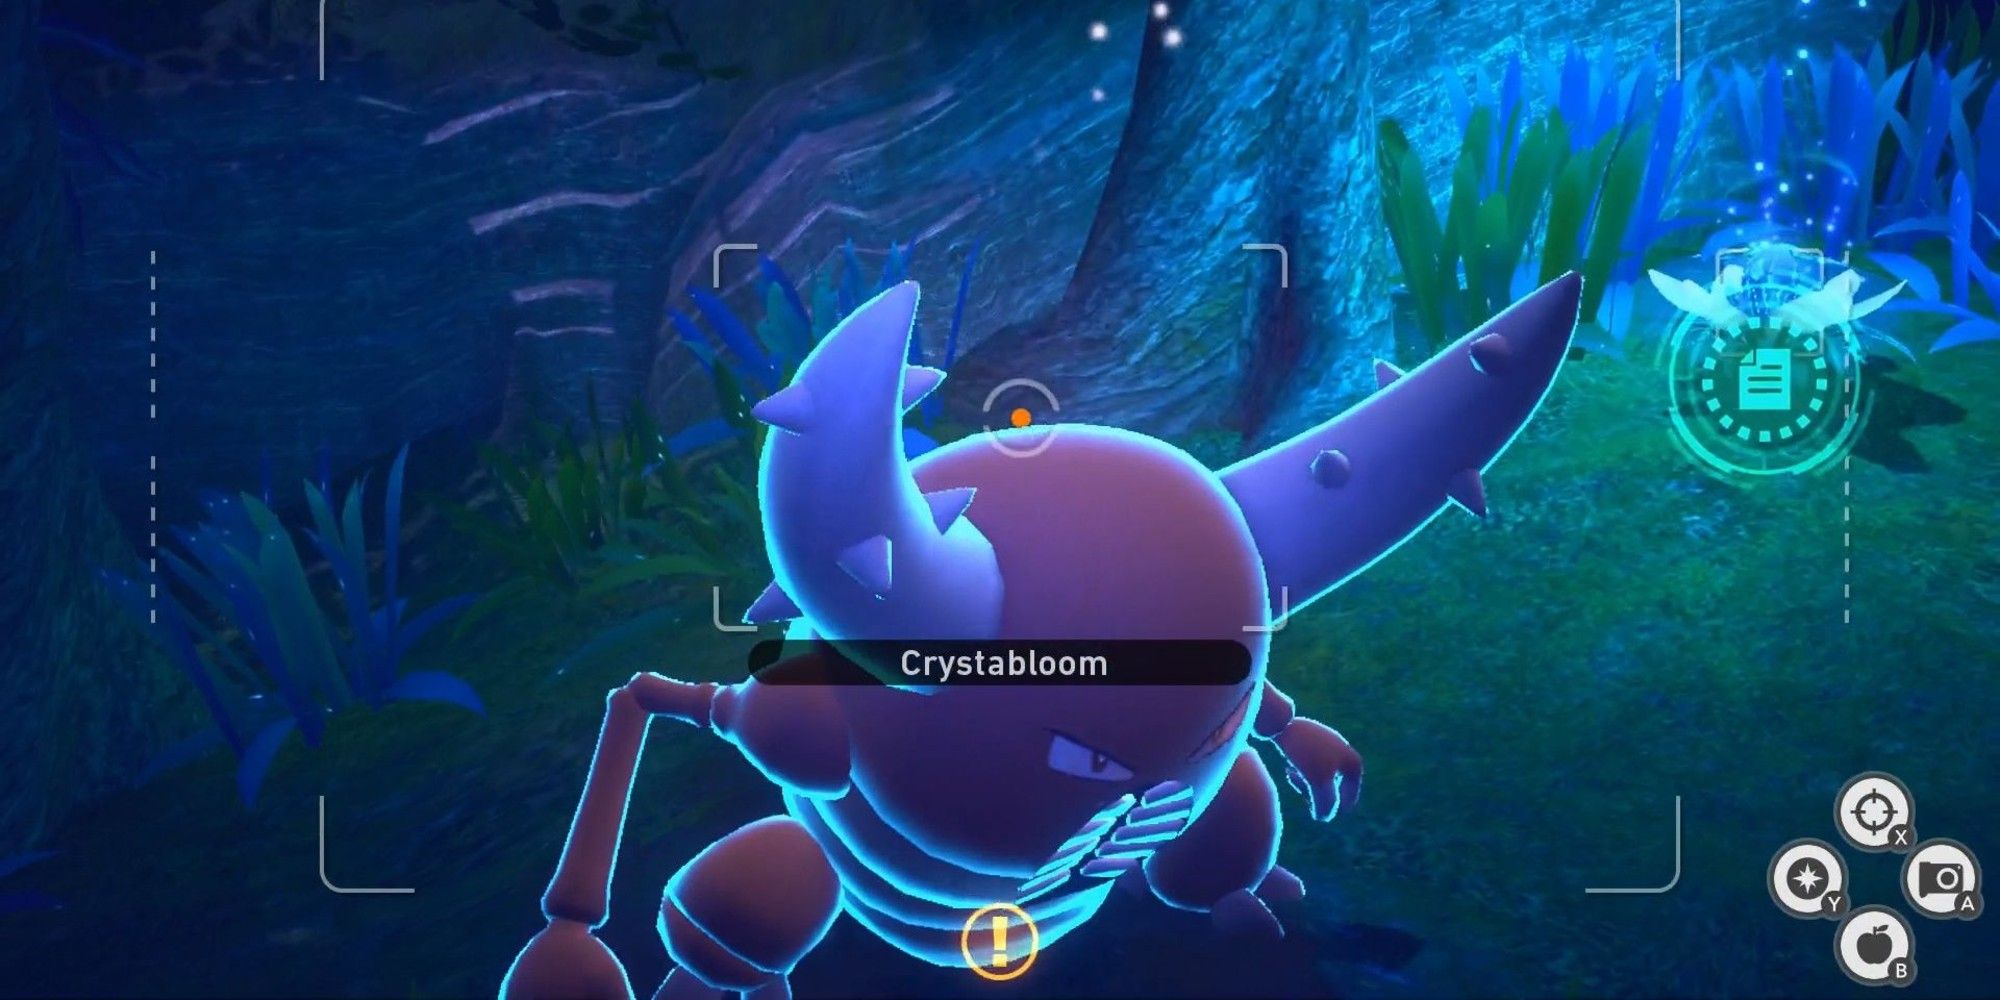 A player photographs a Crystabloom behind Mr. Mime in New Pokémon Snap